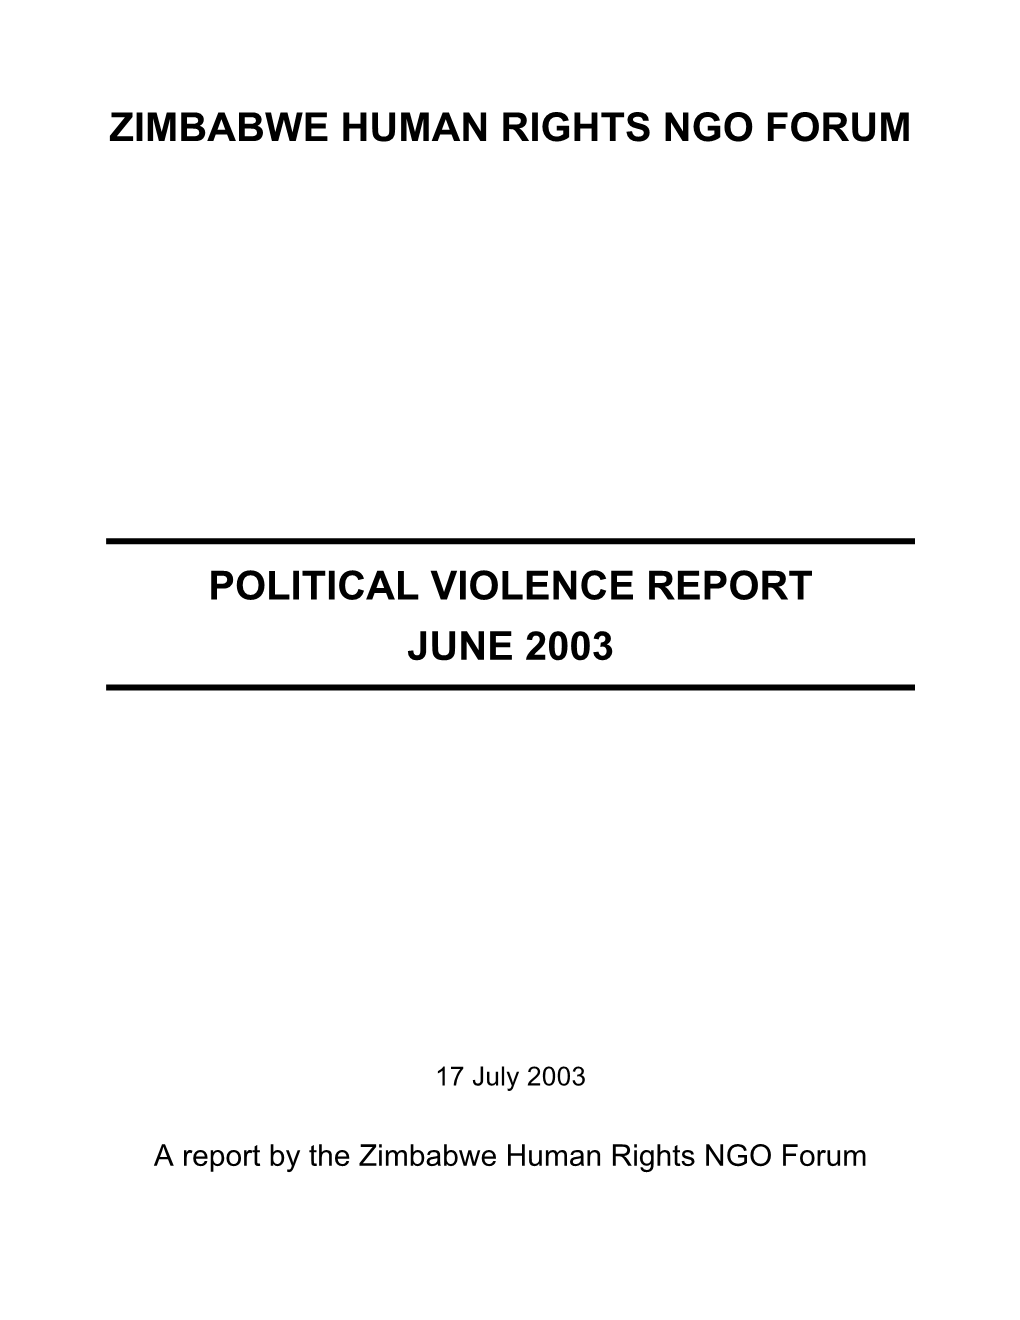 Zimbabwe Human Rights NGO Forum Political Violence Report: June 2003 OVERVIEW